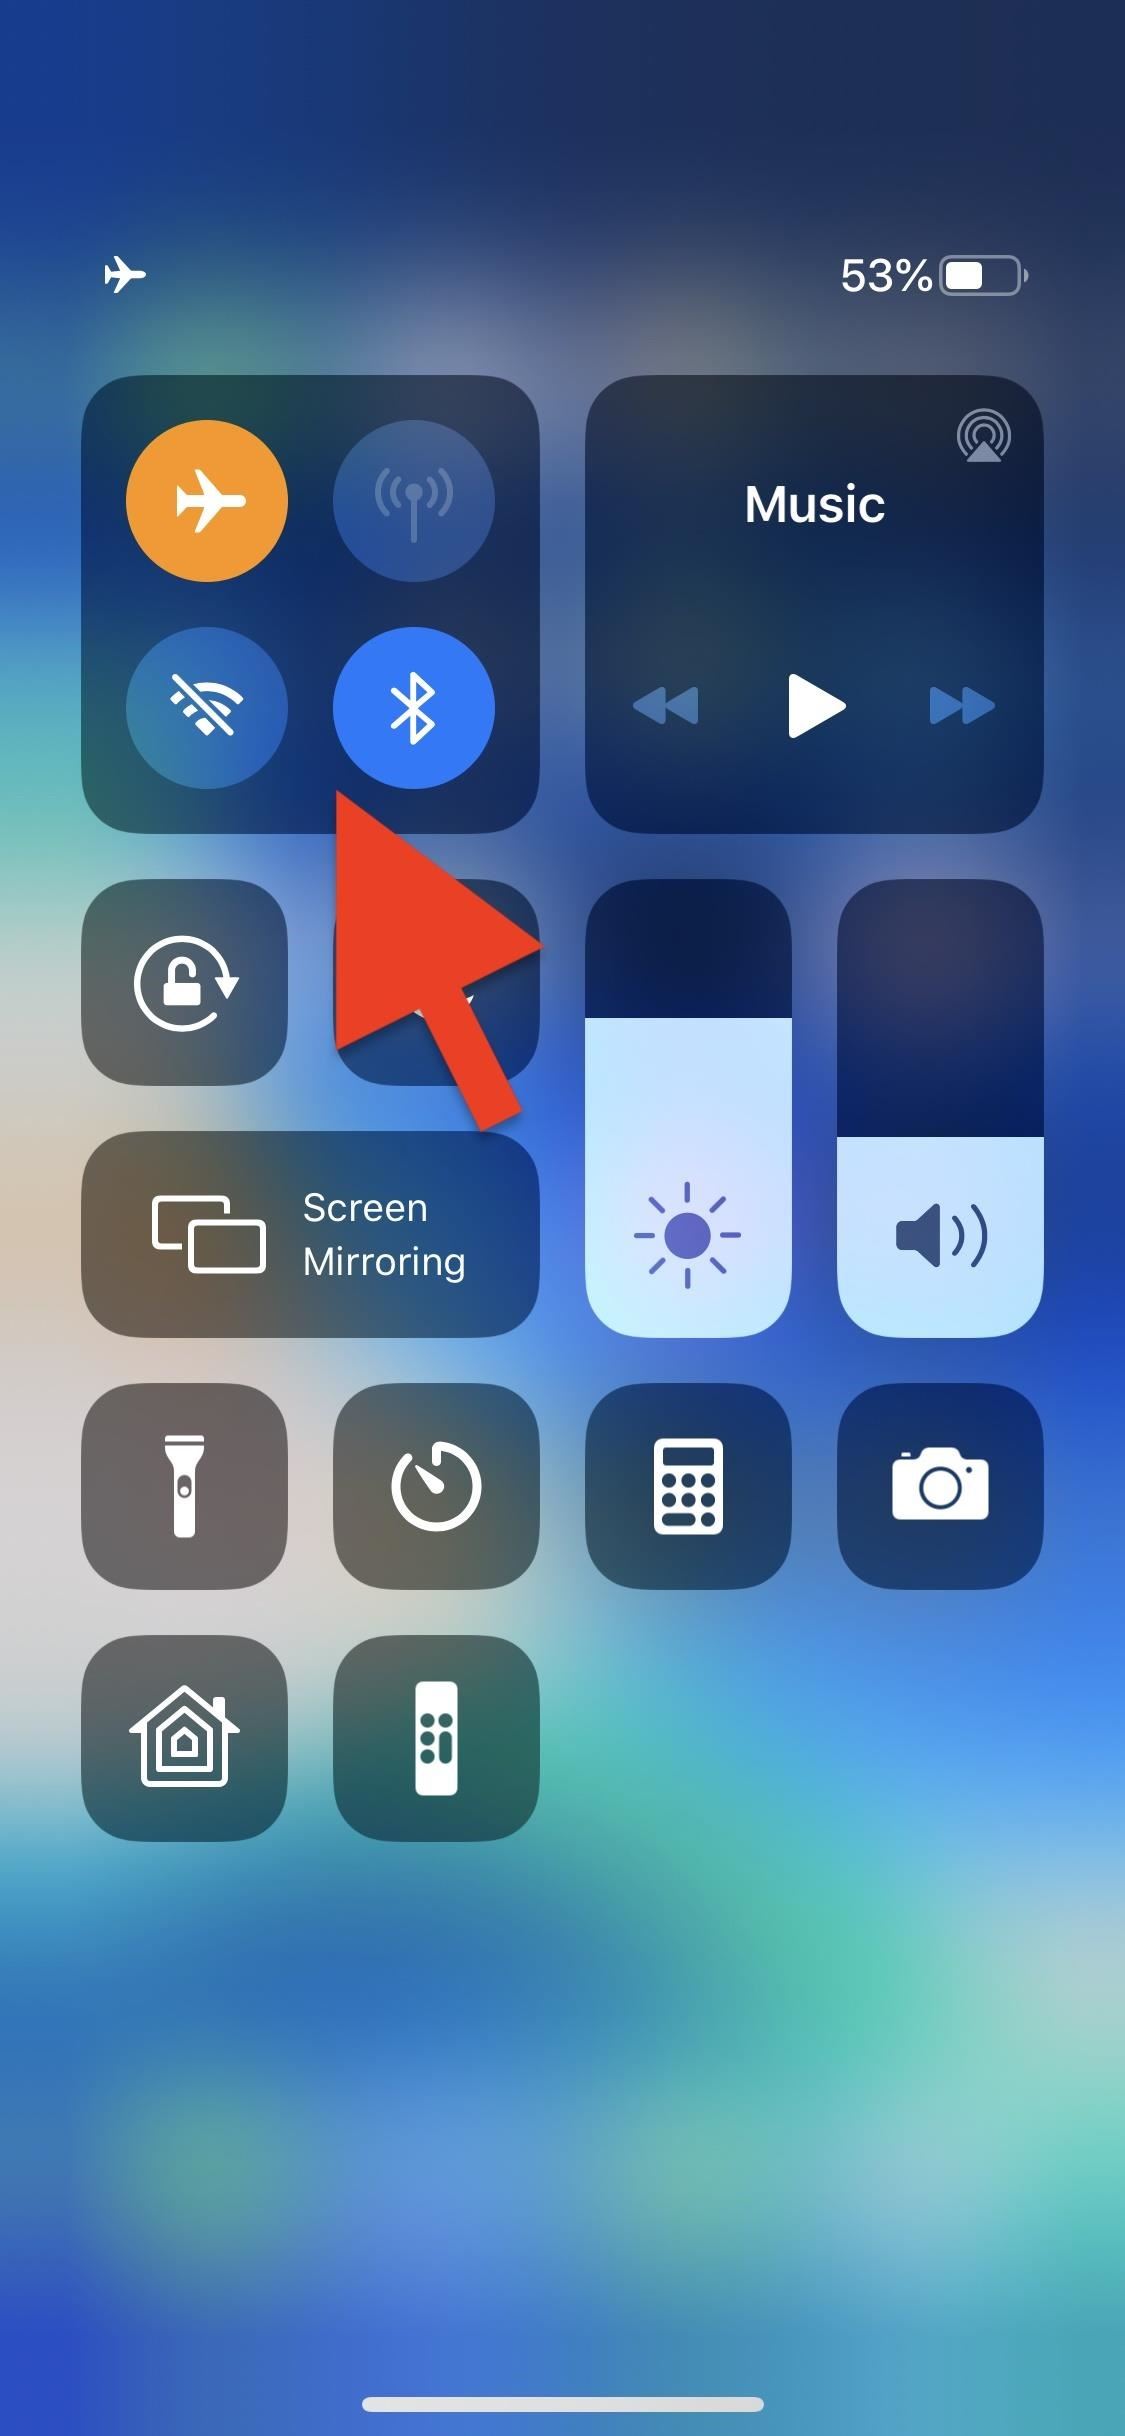 iOS 13 Has Radically Improved Connecting to AirPods & Bluetooth Devices